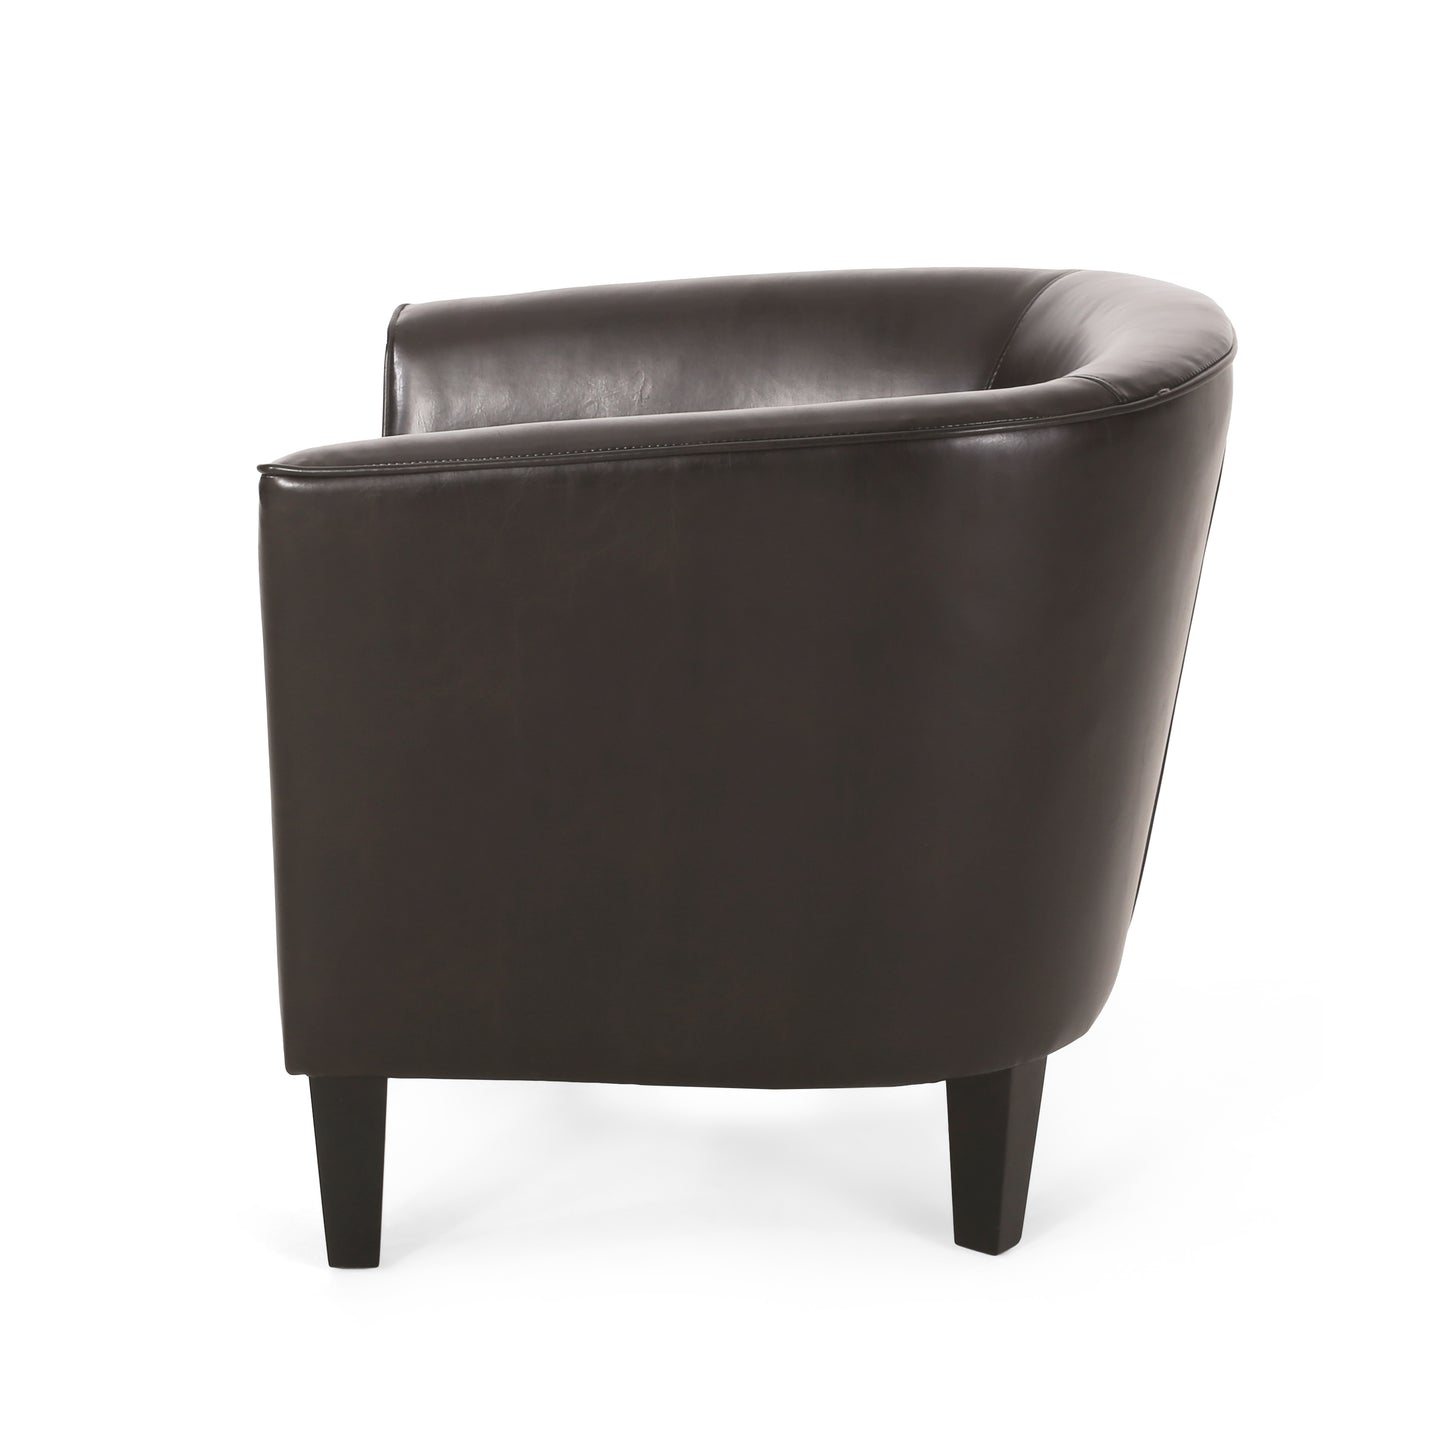 Gelston Brown Leather Club Chair